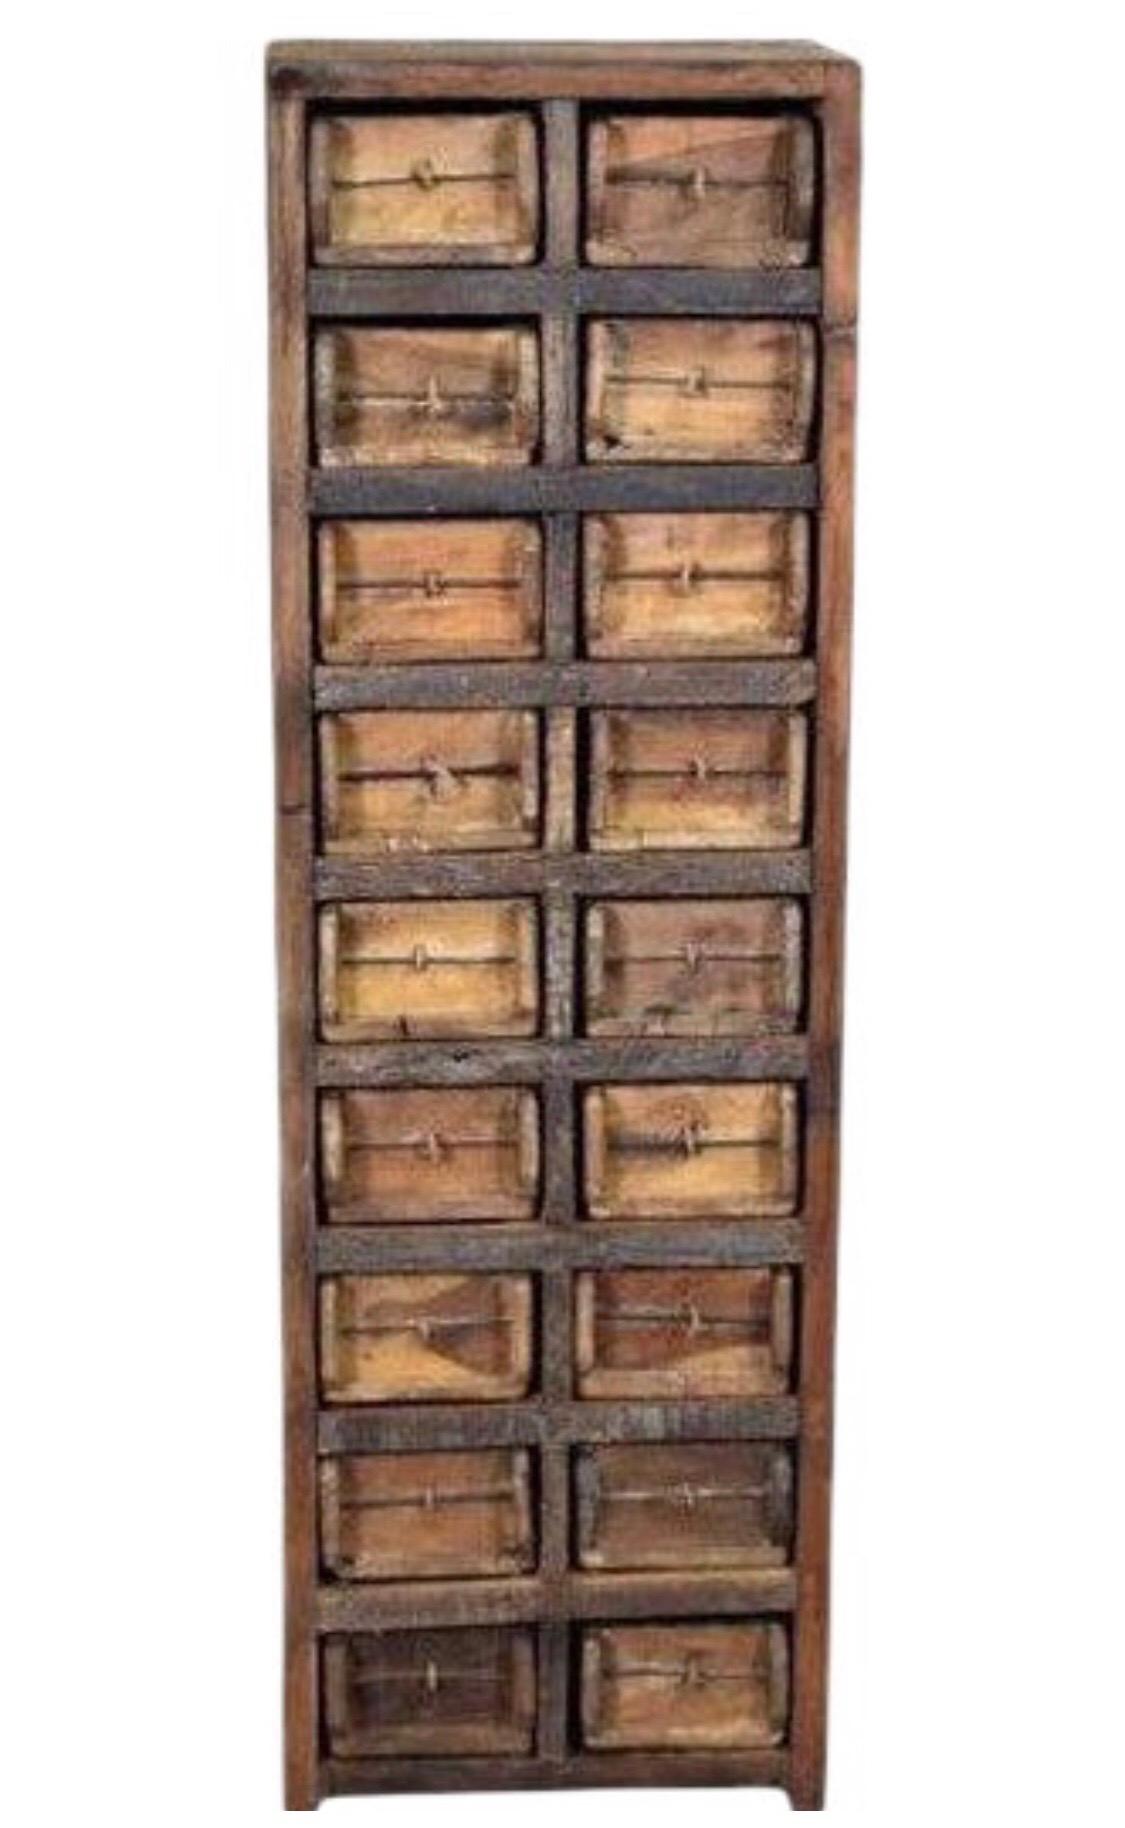 This rectangular wooden cabinet features storage cubbies that house eighteen rectangular drawers that are made from vintage reclaimed wood.